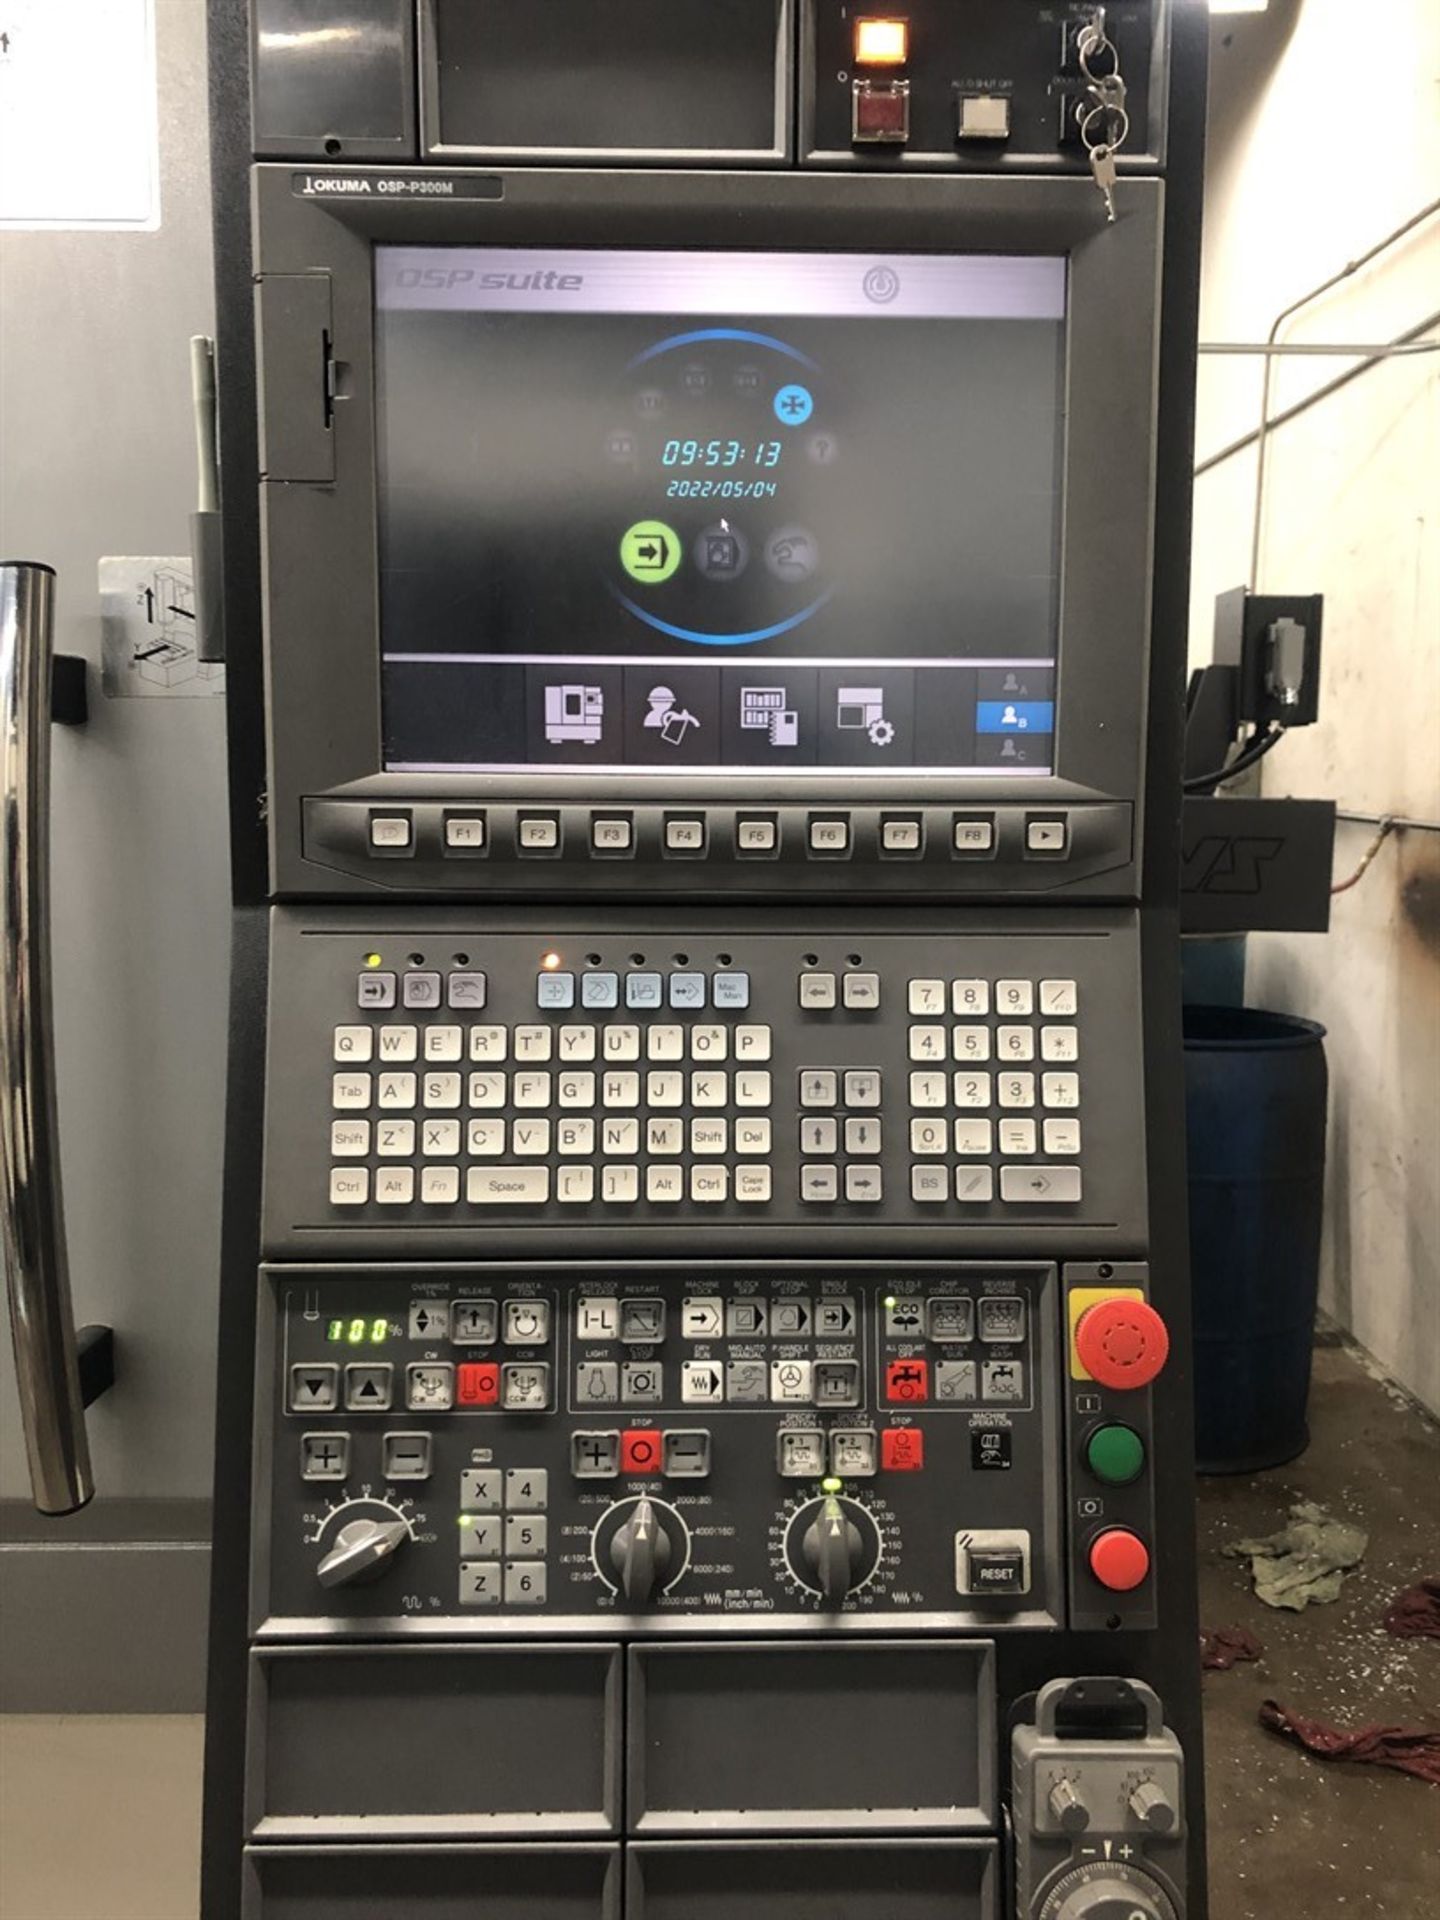 2016 OKUMA GENOS M560-V Vertical Machining Center, s/n 191946, 22” x 51” Table, CT40 Spindle - Image 8 of 11